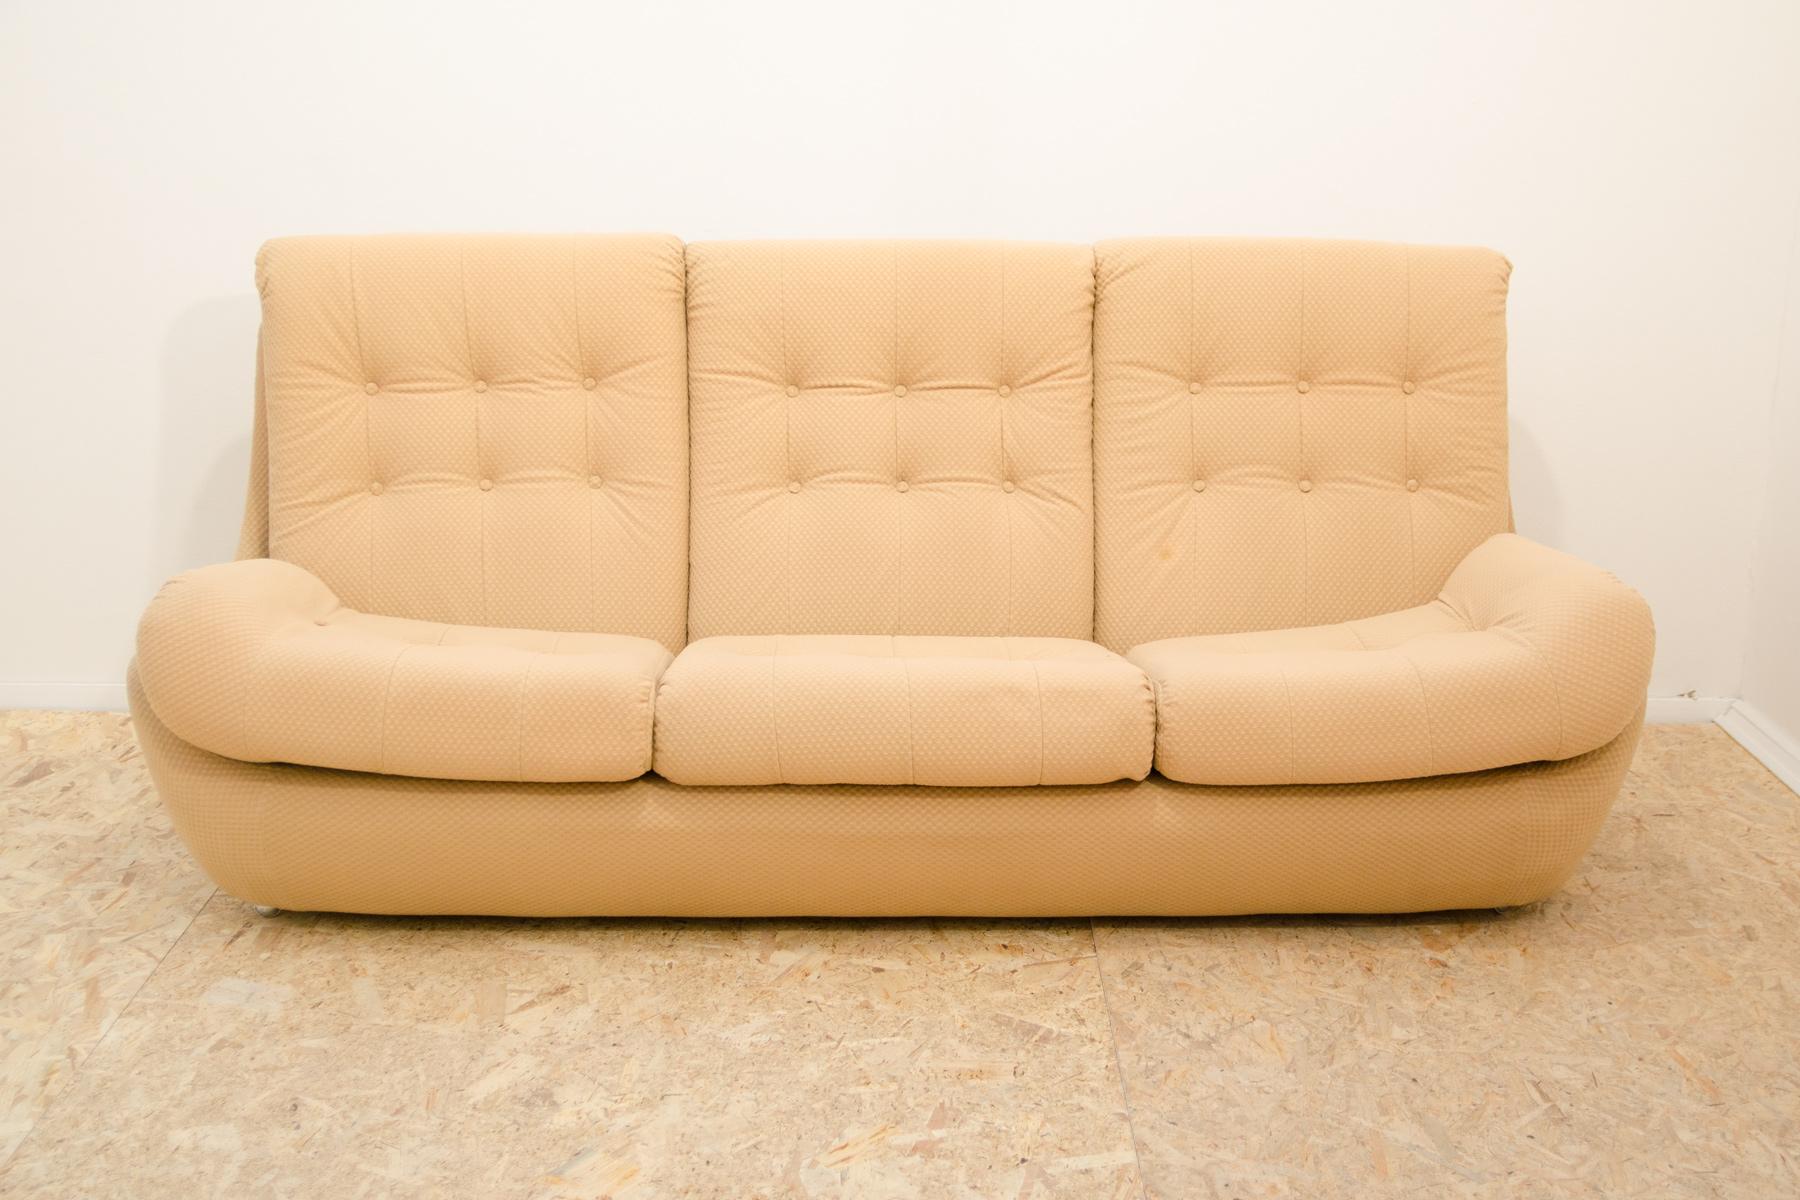 This vintage sofa is a typical example of furniture design of the 1970/1980´s in the former Czechoslovakia. It was made by JITONA company in the 1970´s.

The sofa is based on a strong and light polystyrene molding upholstered with PUR foam and